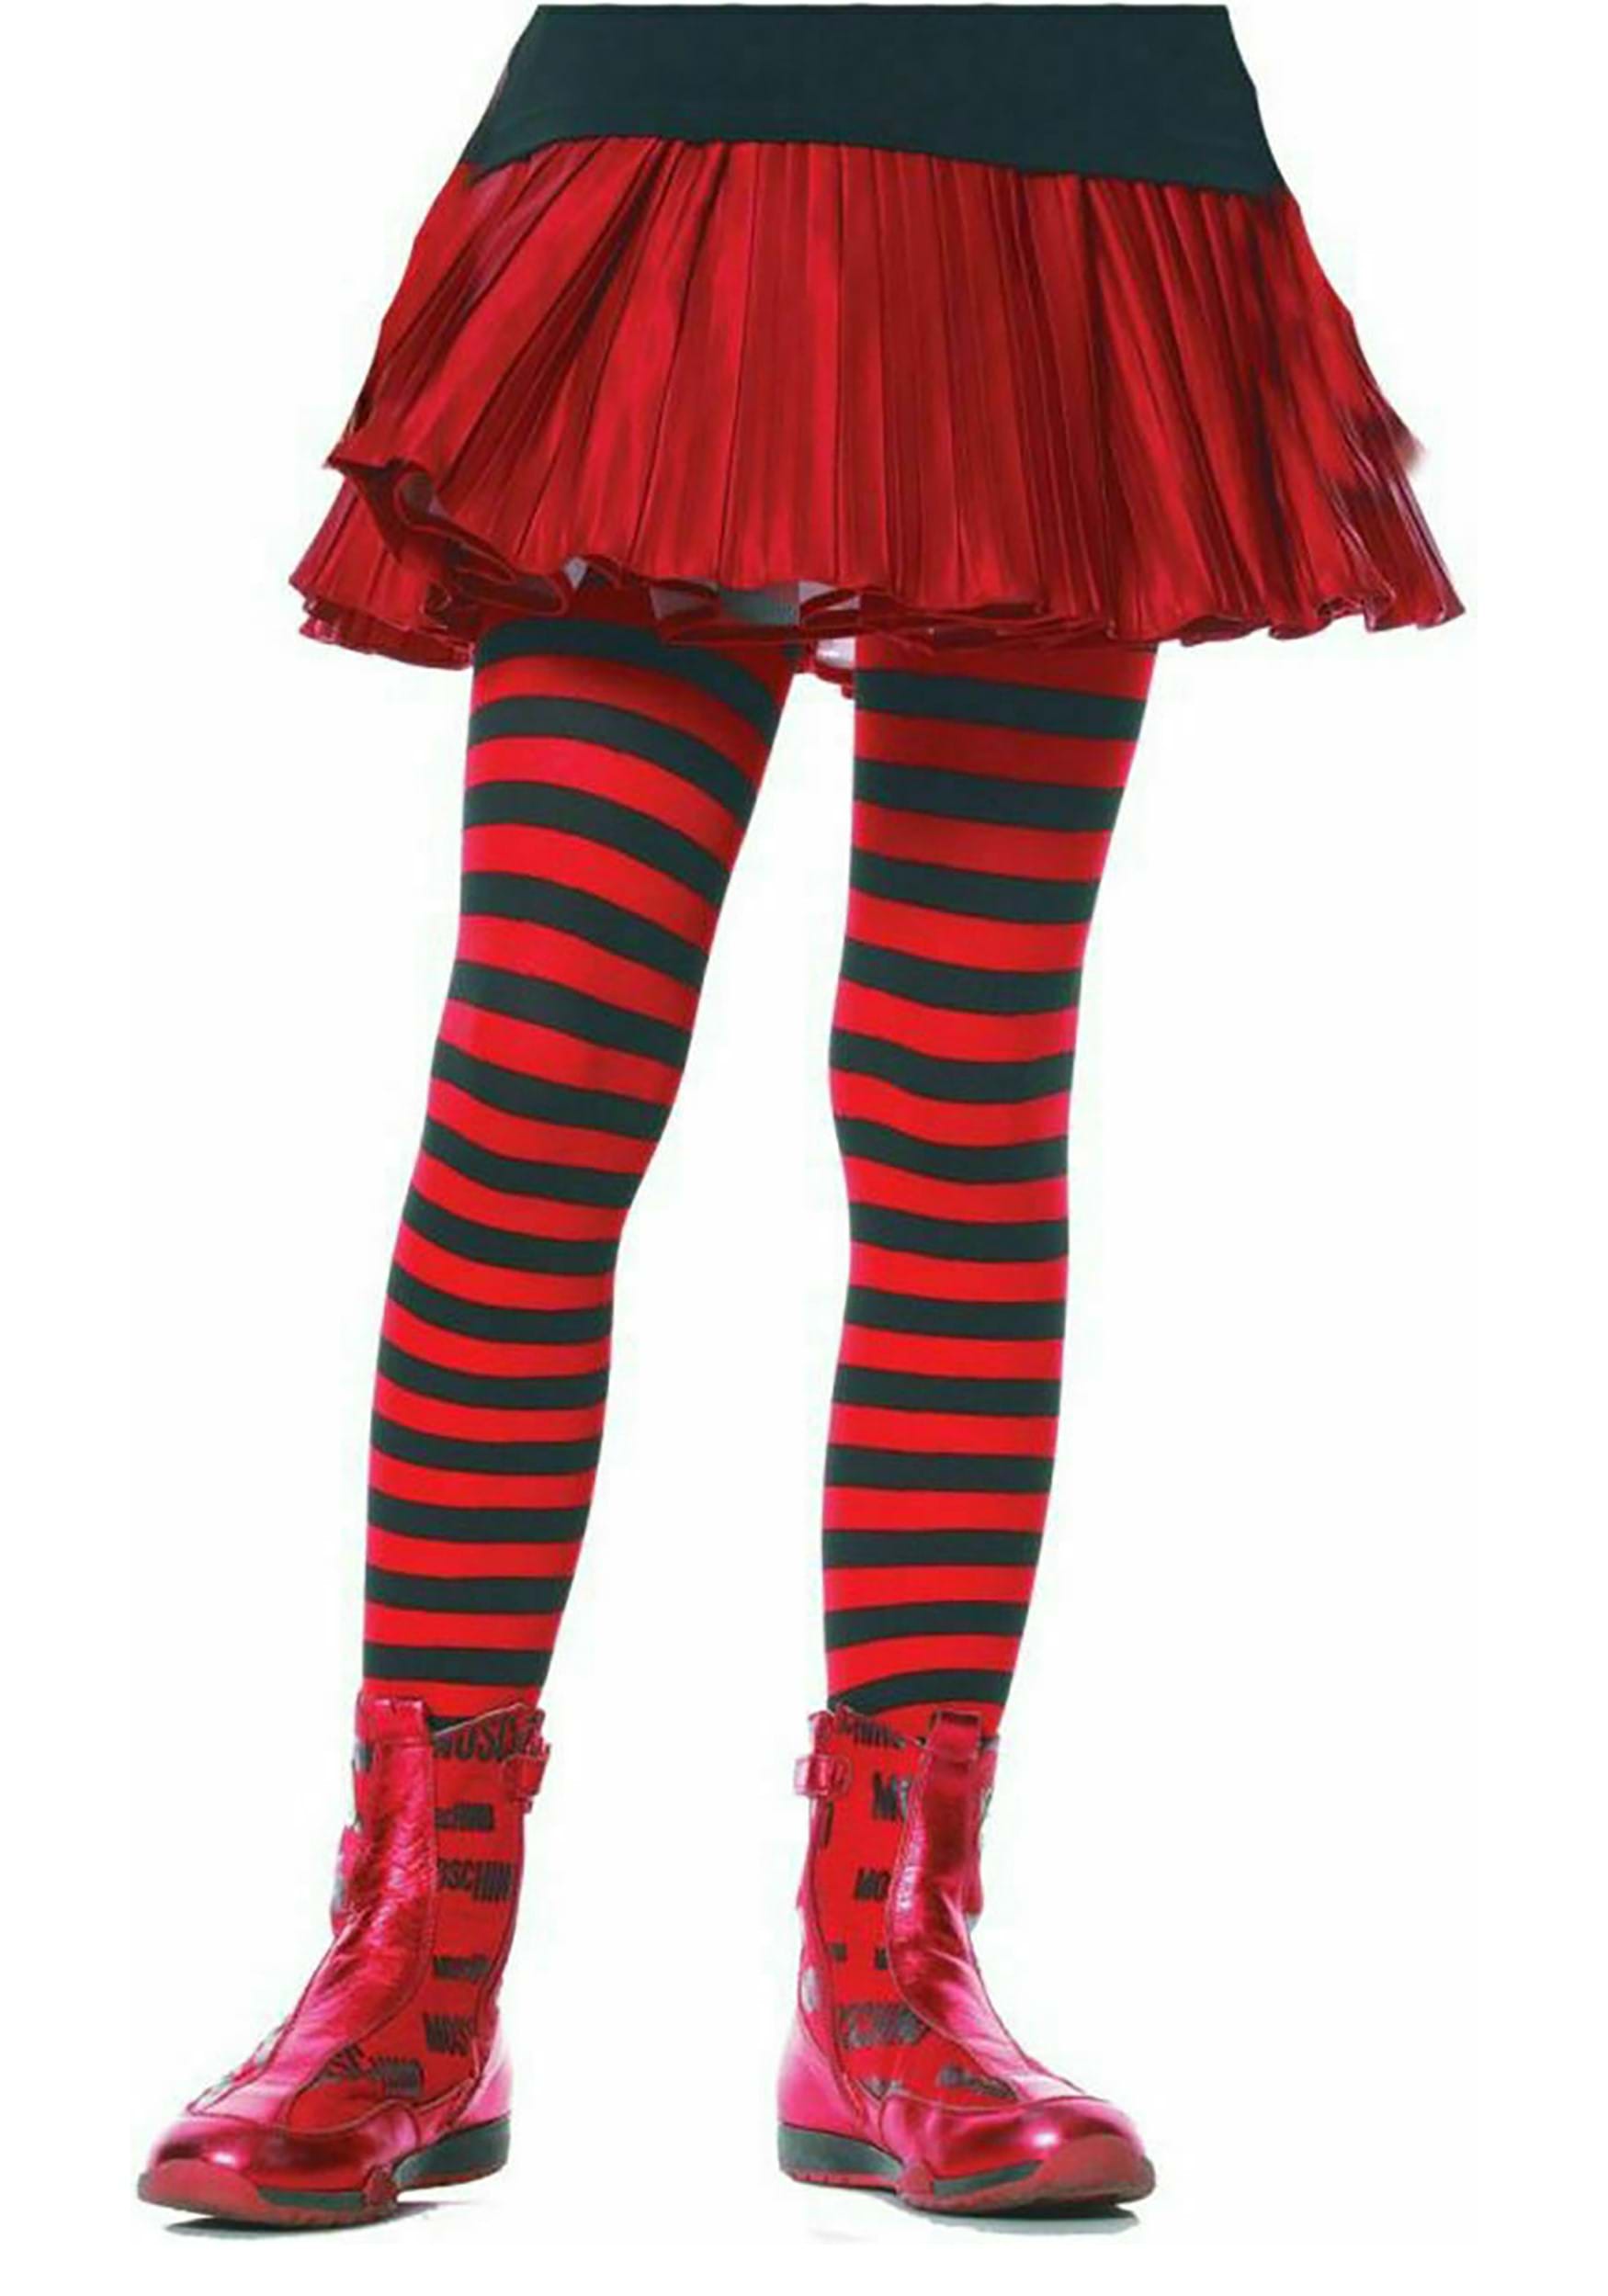 Black And Red Striped Kid's Tights , Kid's Striped Tights